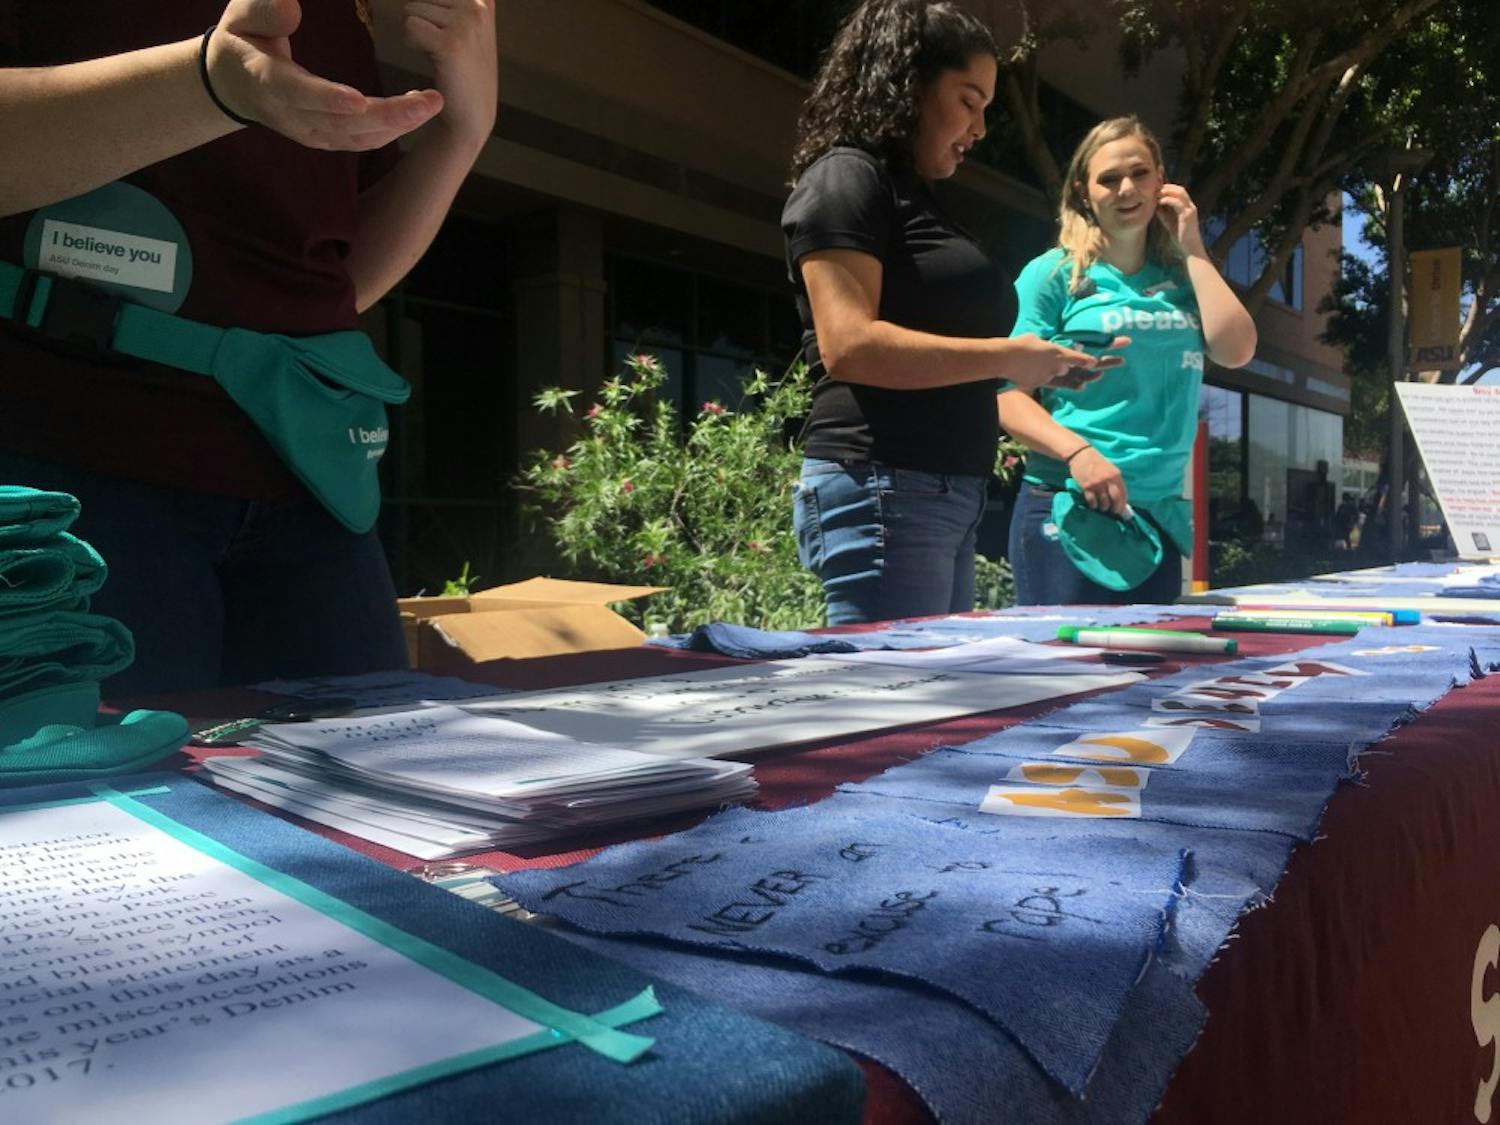 Students at&nbsp;ASU's Downtown Phoenix&nbsp;campus participate in Denim Day activities&nbsp;on Wednesday, April 26, 2017.